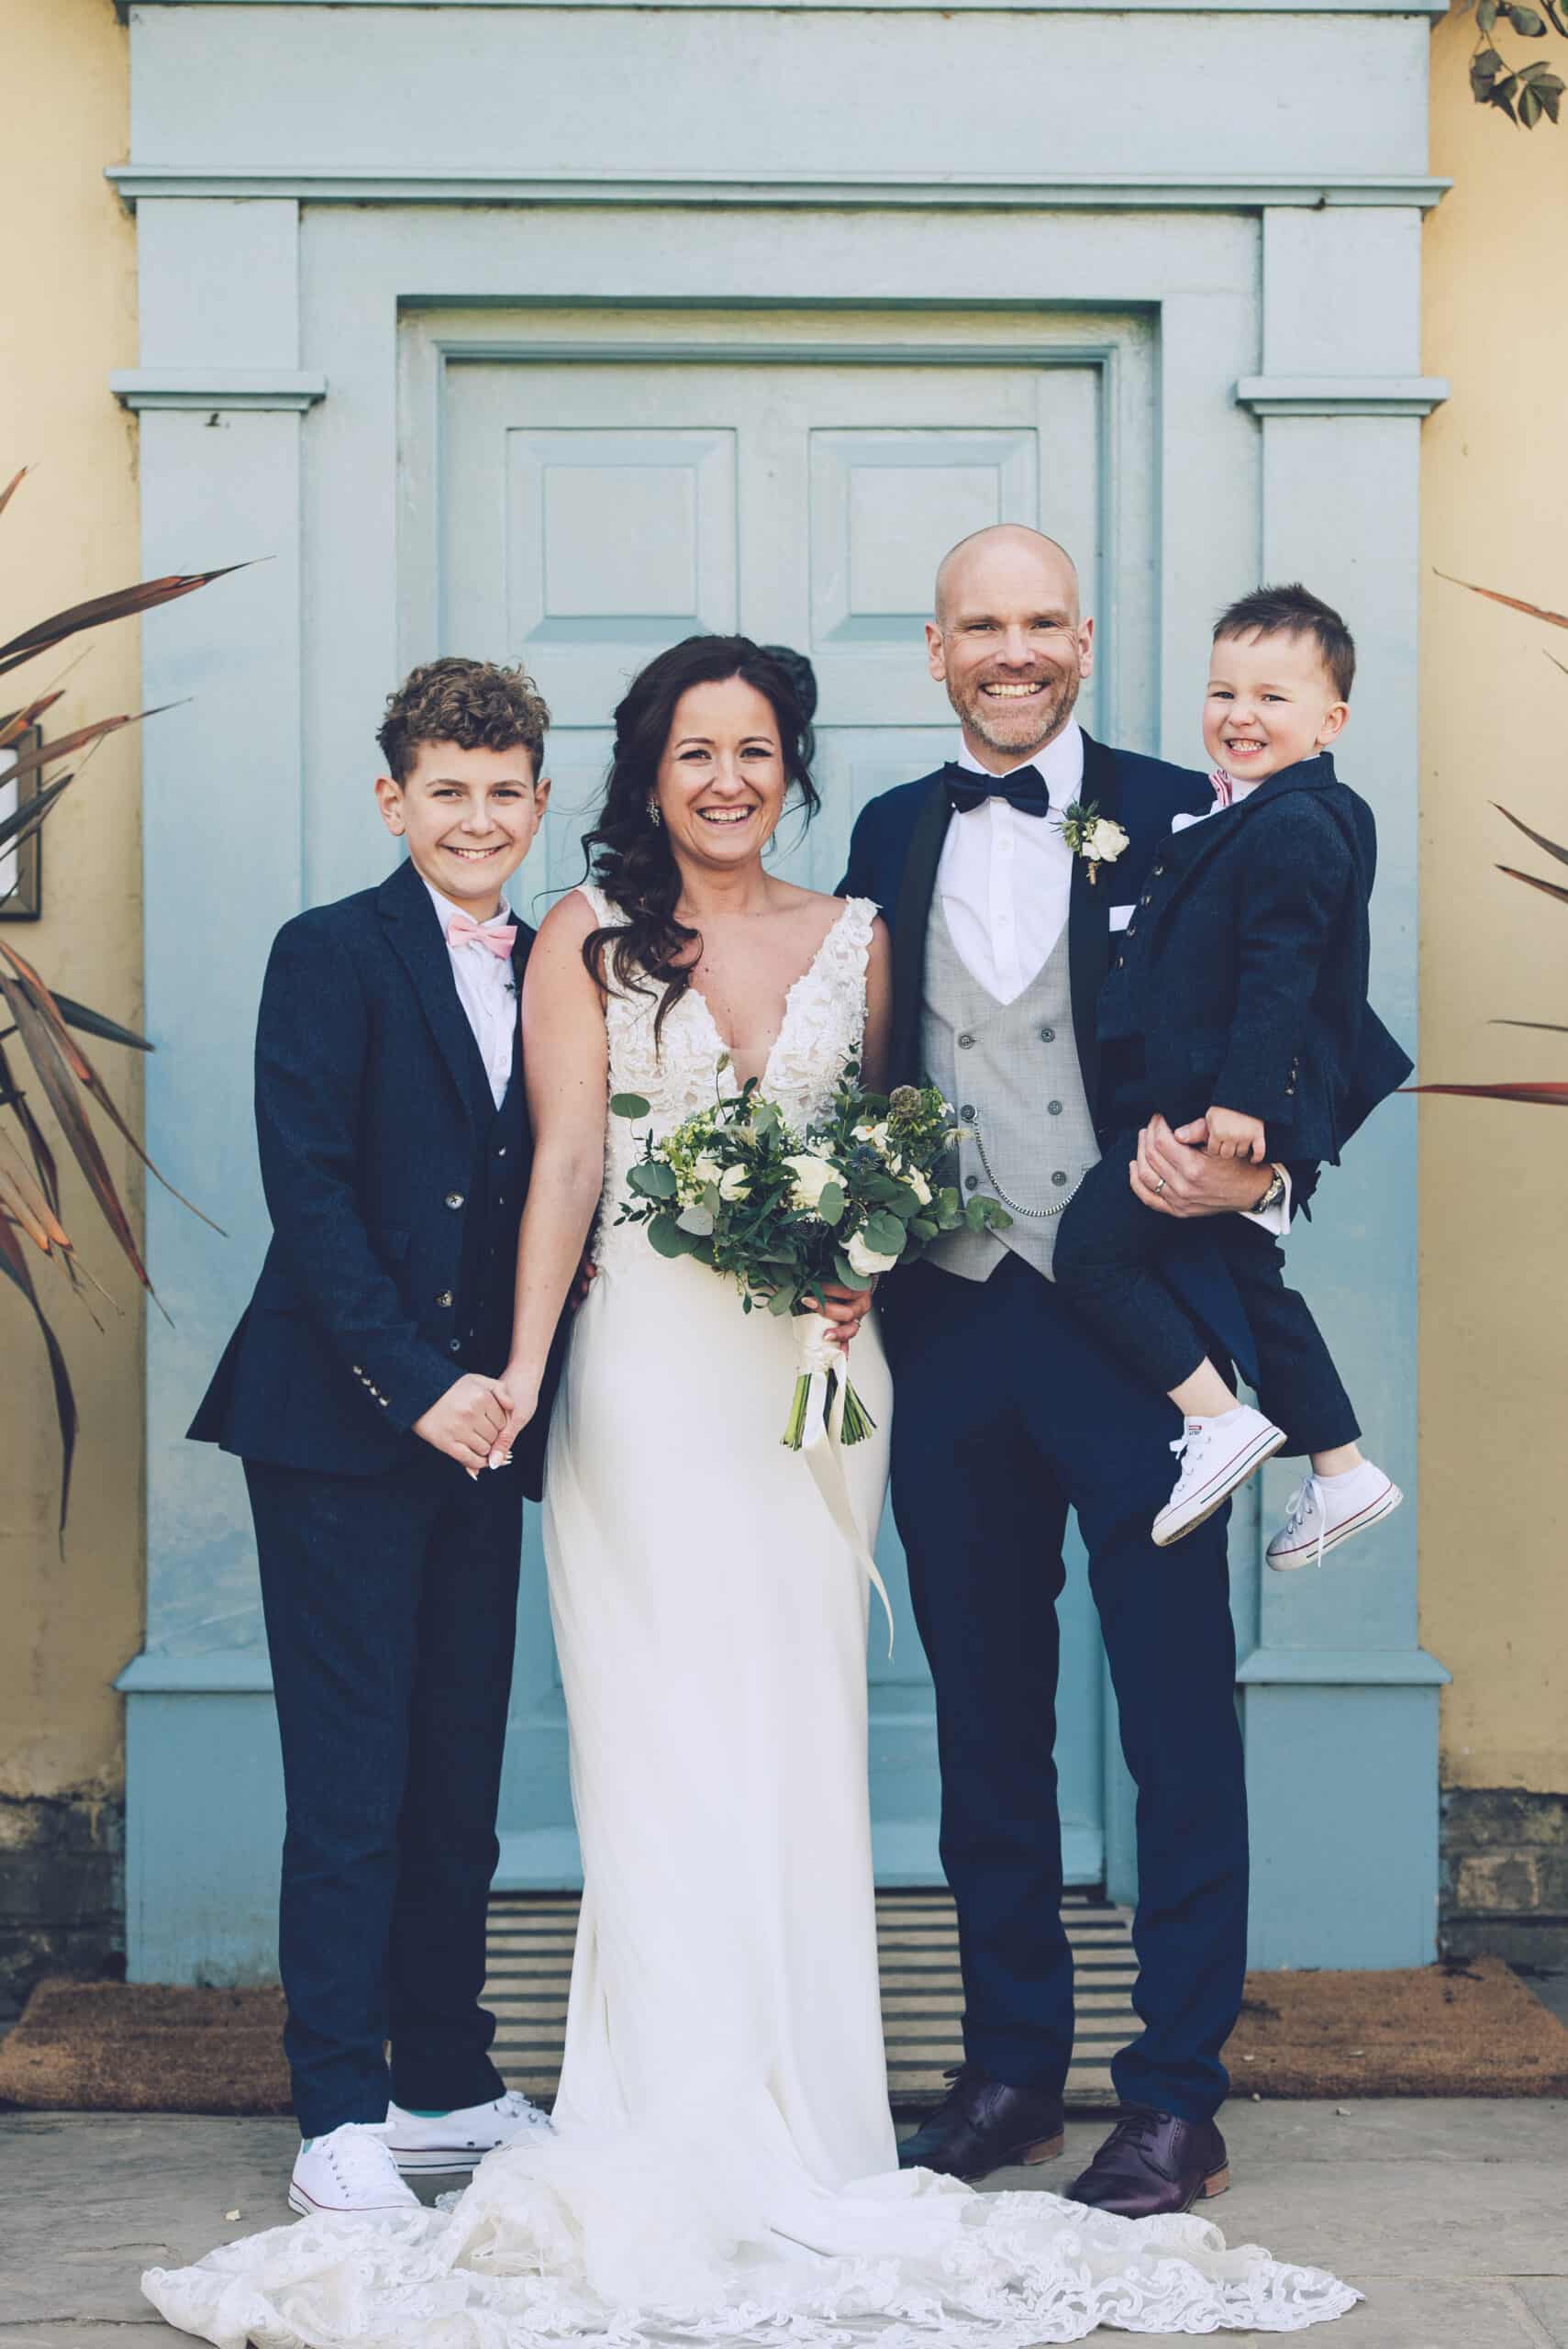 Family of four on wedding day